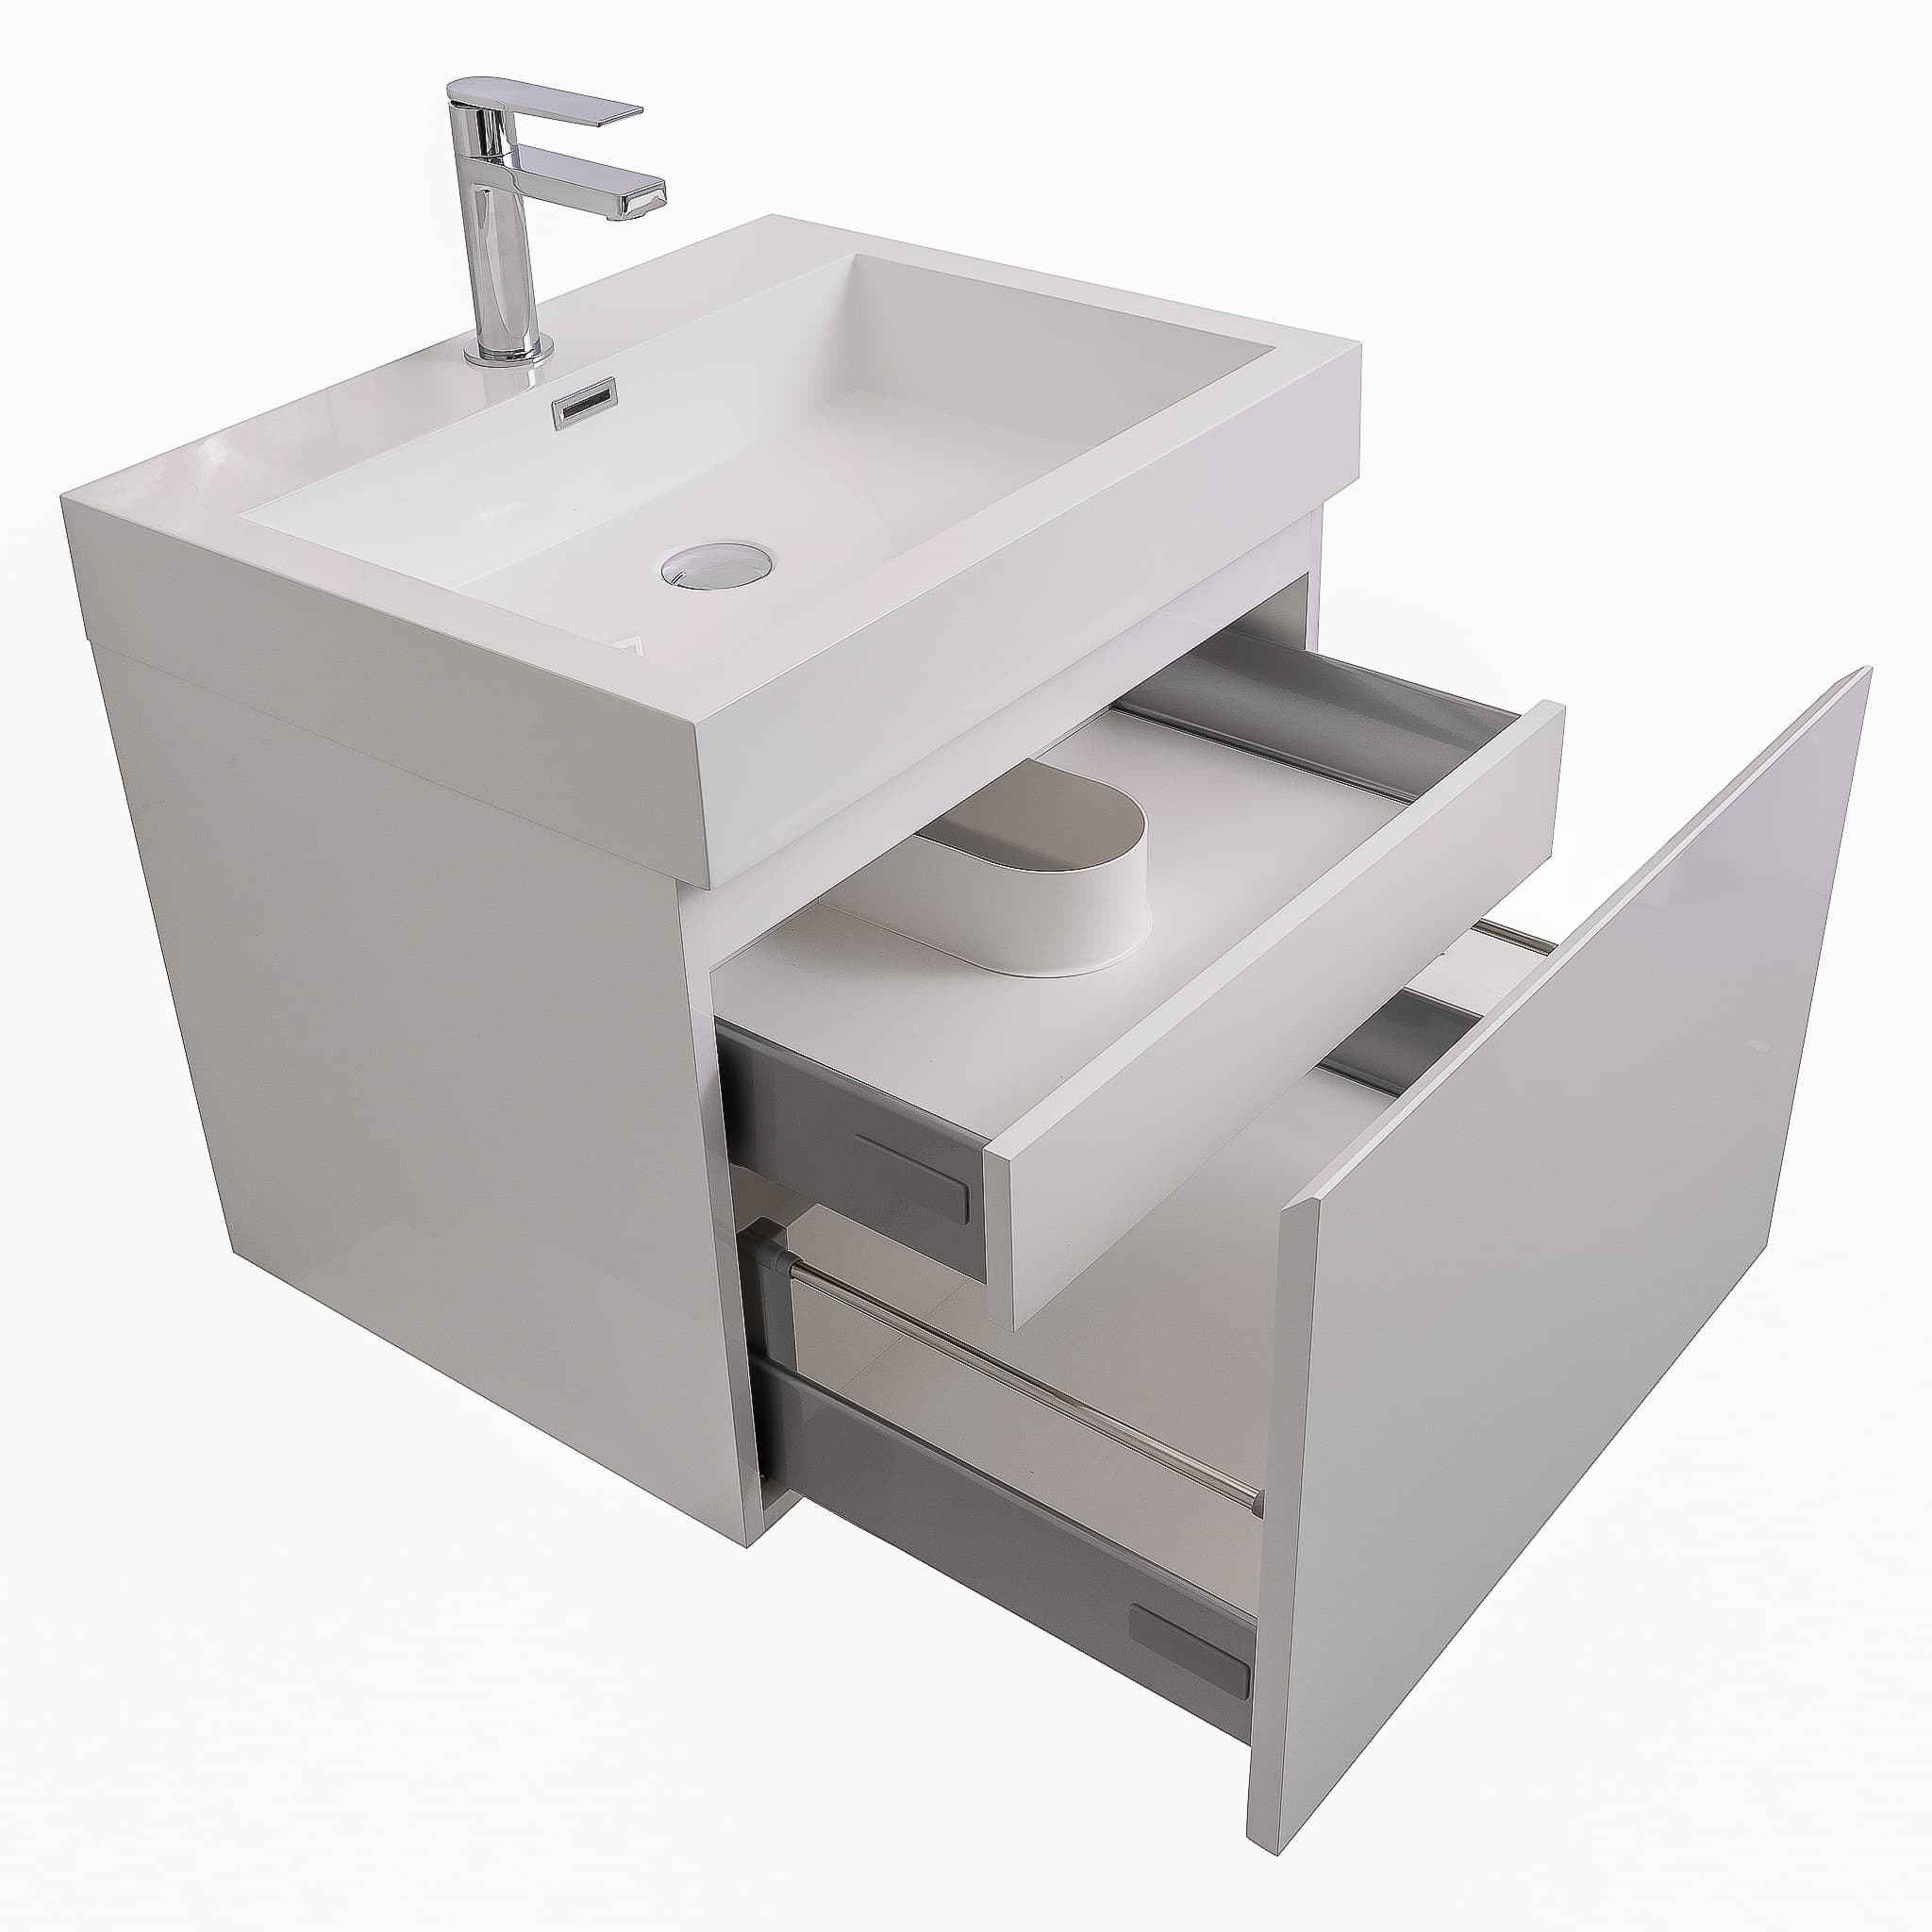 Aquamoon Venice 24" Square Sink White Wall Mounted Modern Bathroom Vanity Set. Mirror And Faucet Included.